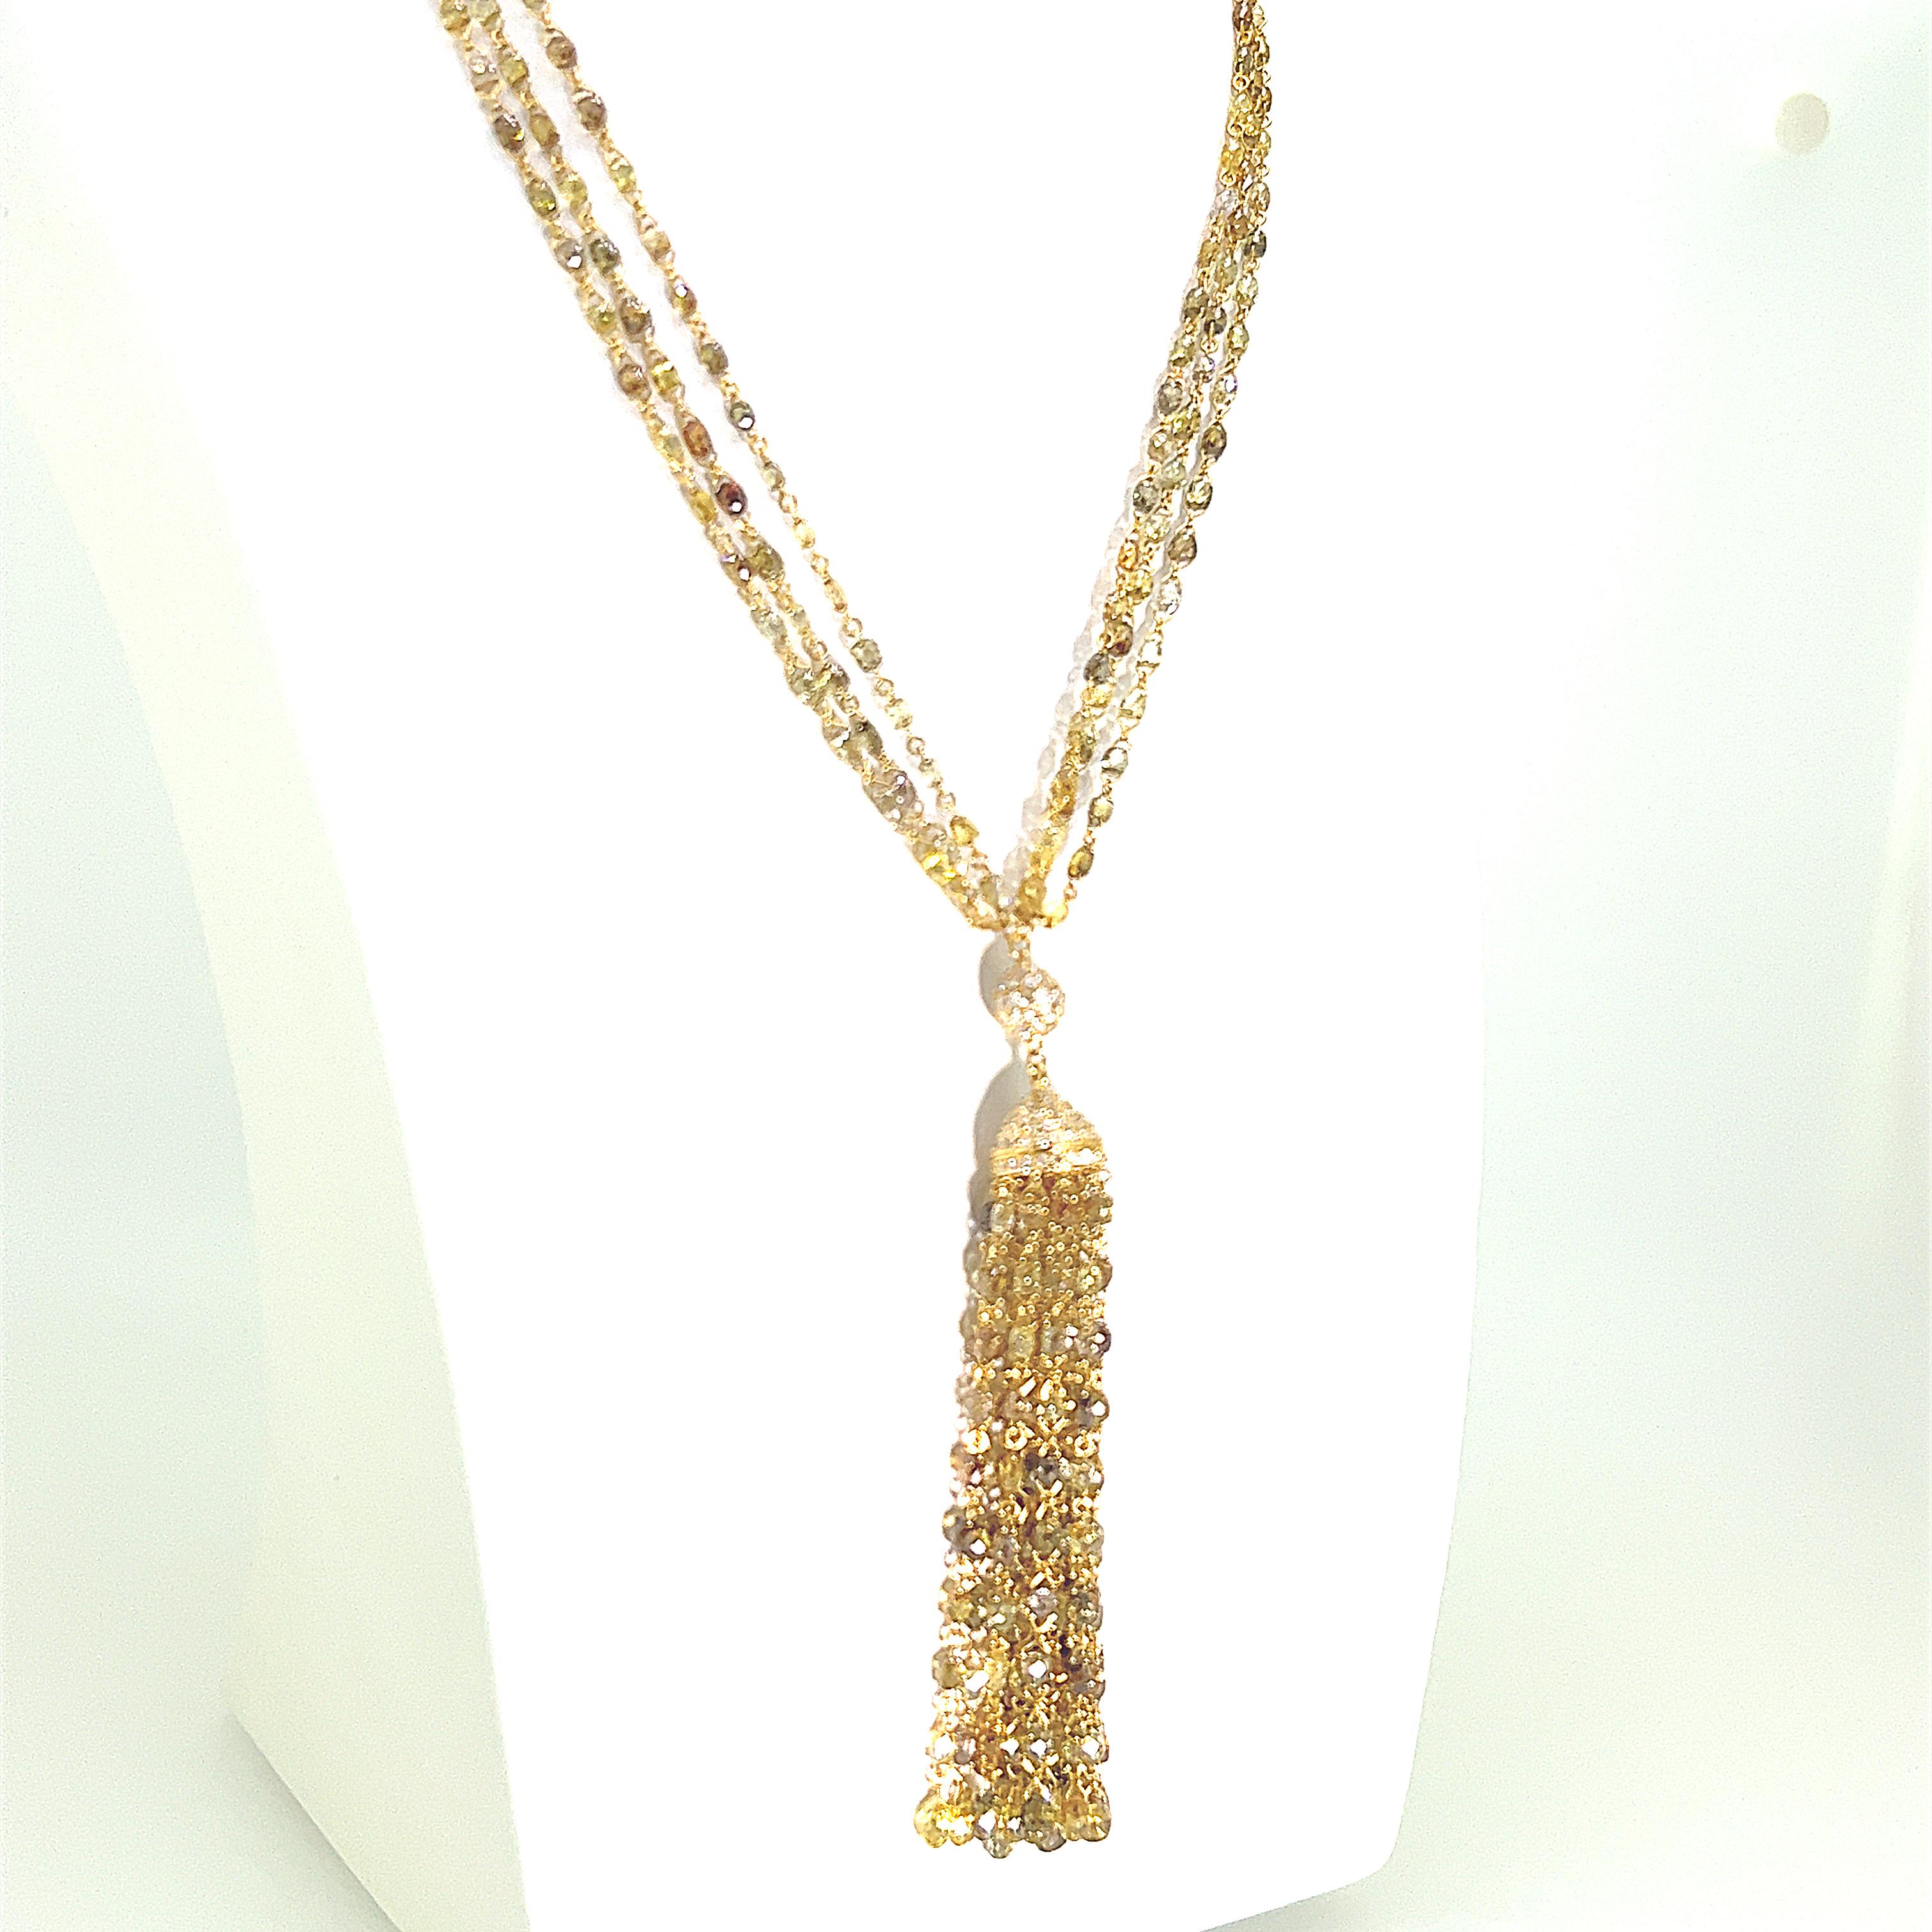 This is a timeless piece of tassel necklace inspired by the 1920 style.   It features 959 pieces of Briolette cut and Round Brilliant cut Yellow Diamonds set on 18 Karat Yellow Gold with a 7cm tassel pendant weighing 59.66 carats in total.  